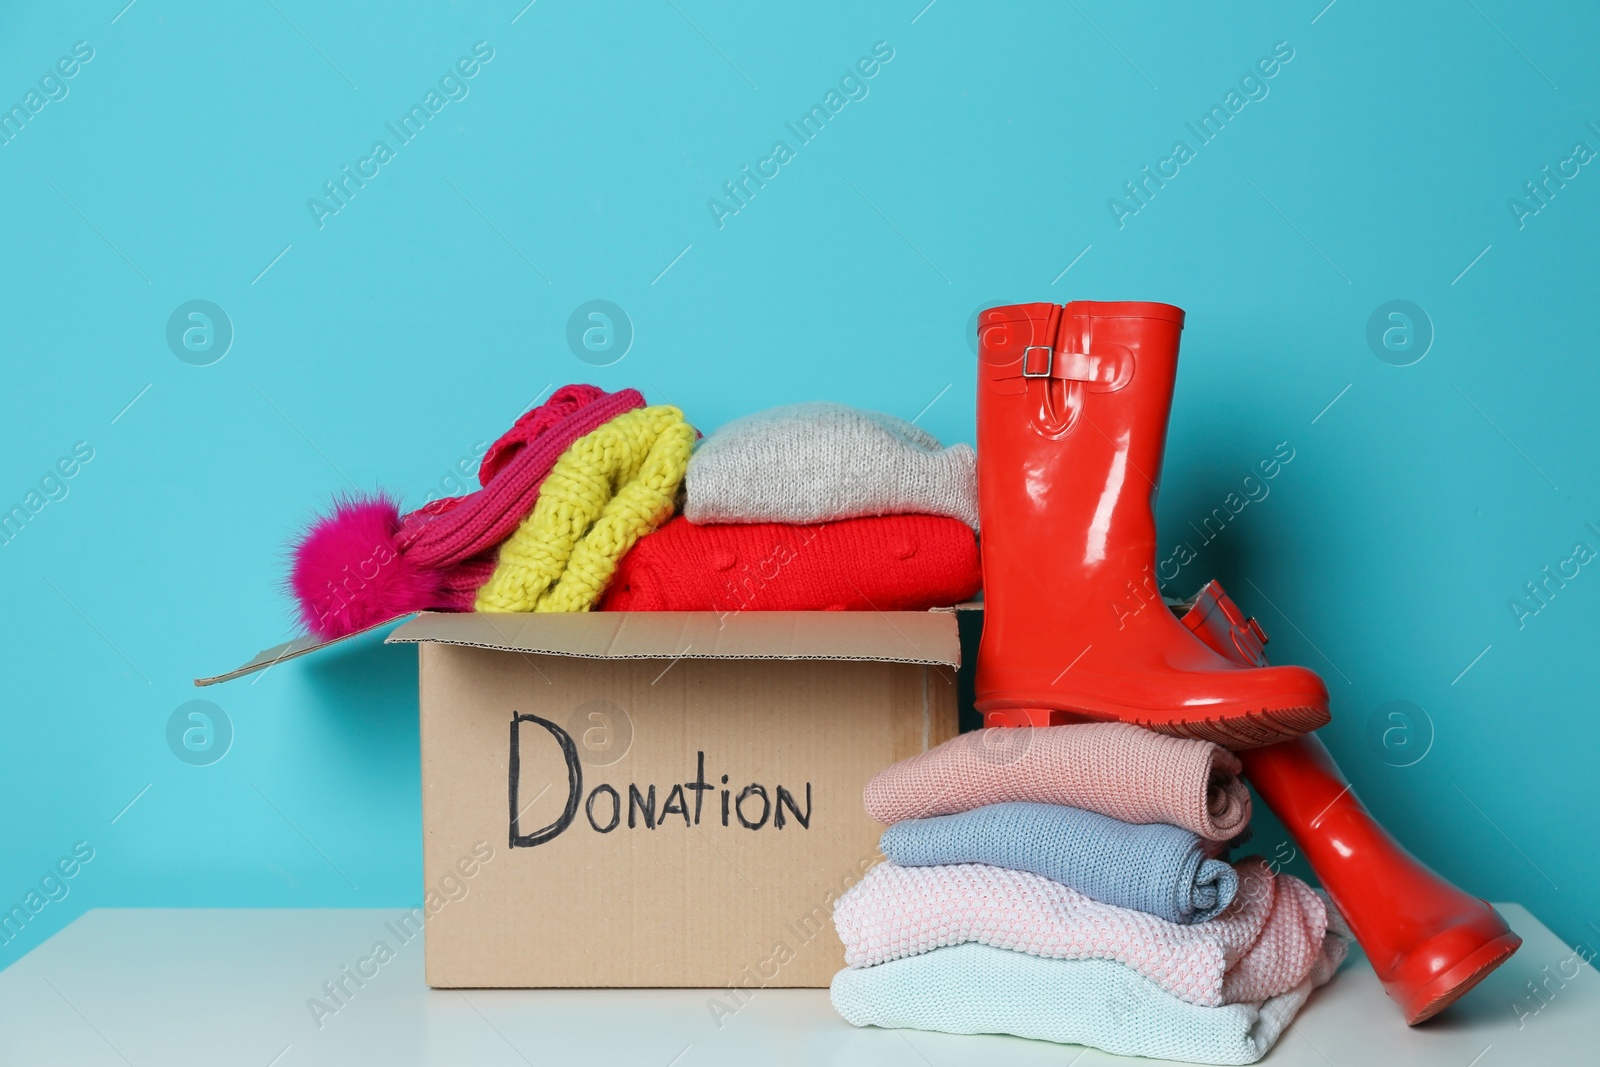 Photo of Donation box, knitted clothes and rubber boots on table against color background